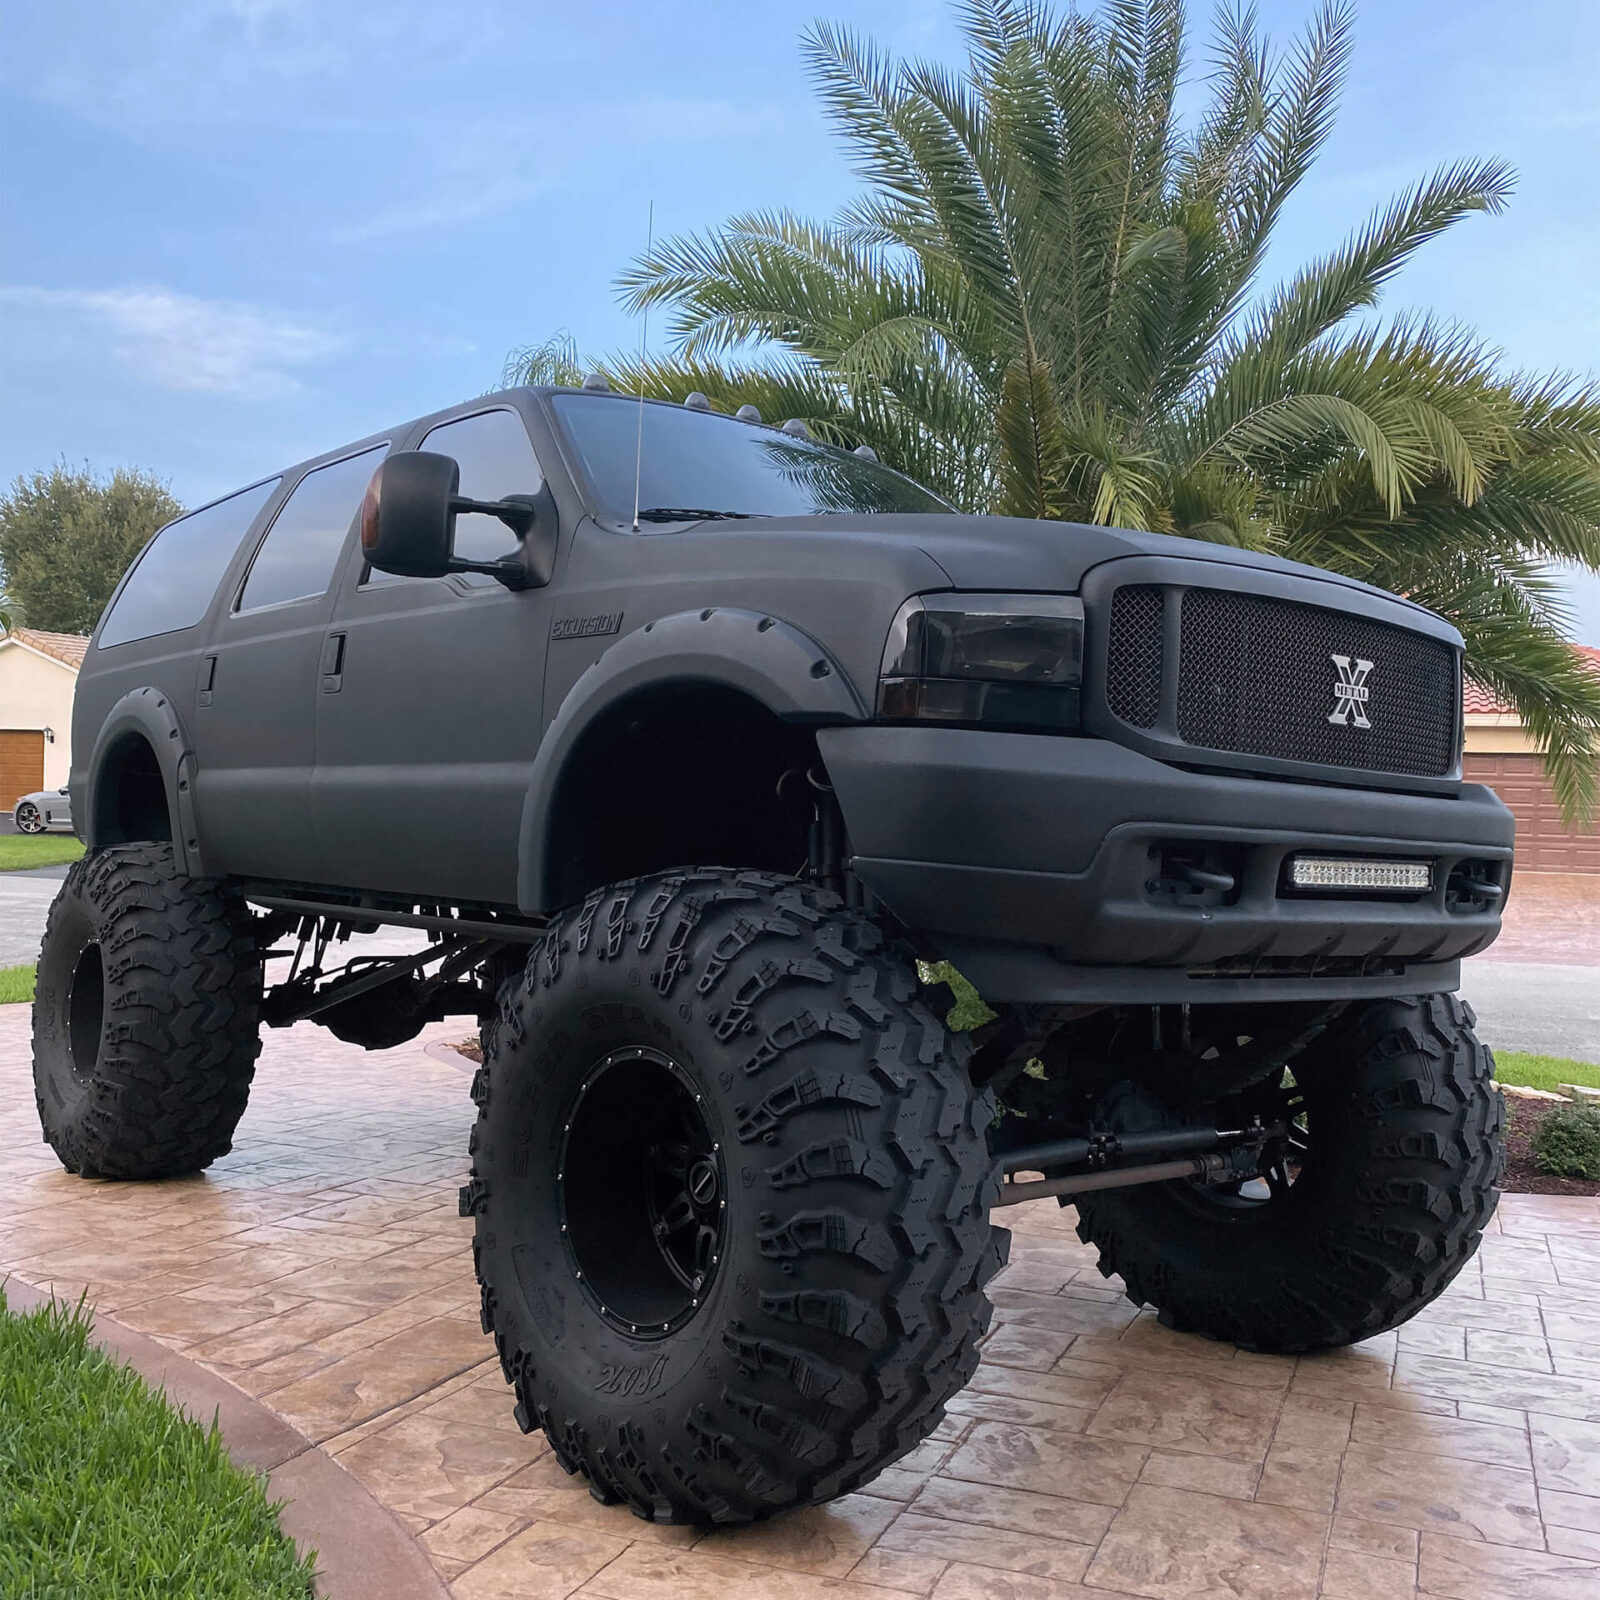 Lifted 2004 Ford Excursion Monster Truck On 49” Super Swampers -  offroadium.com